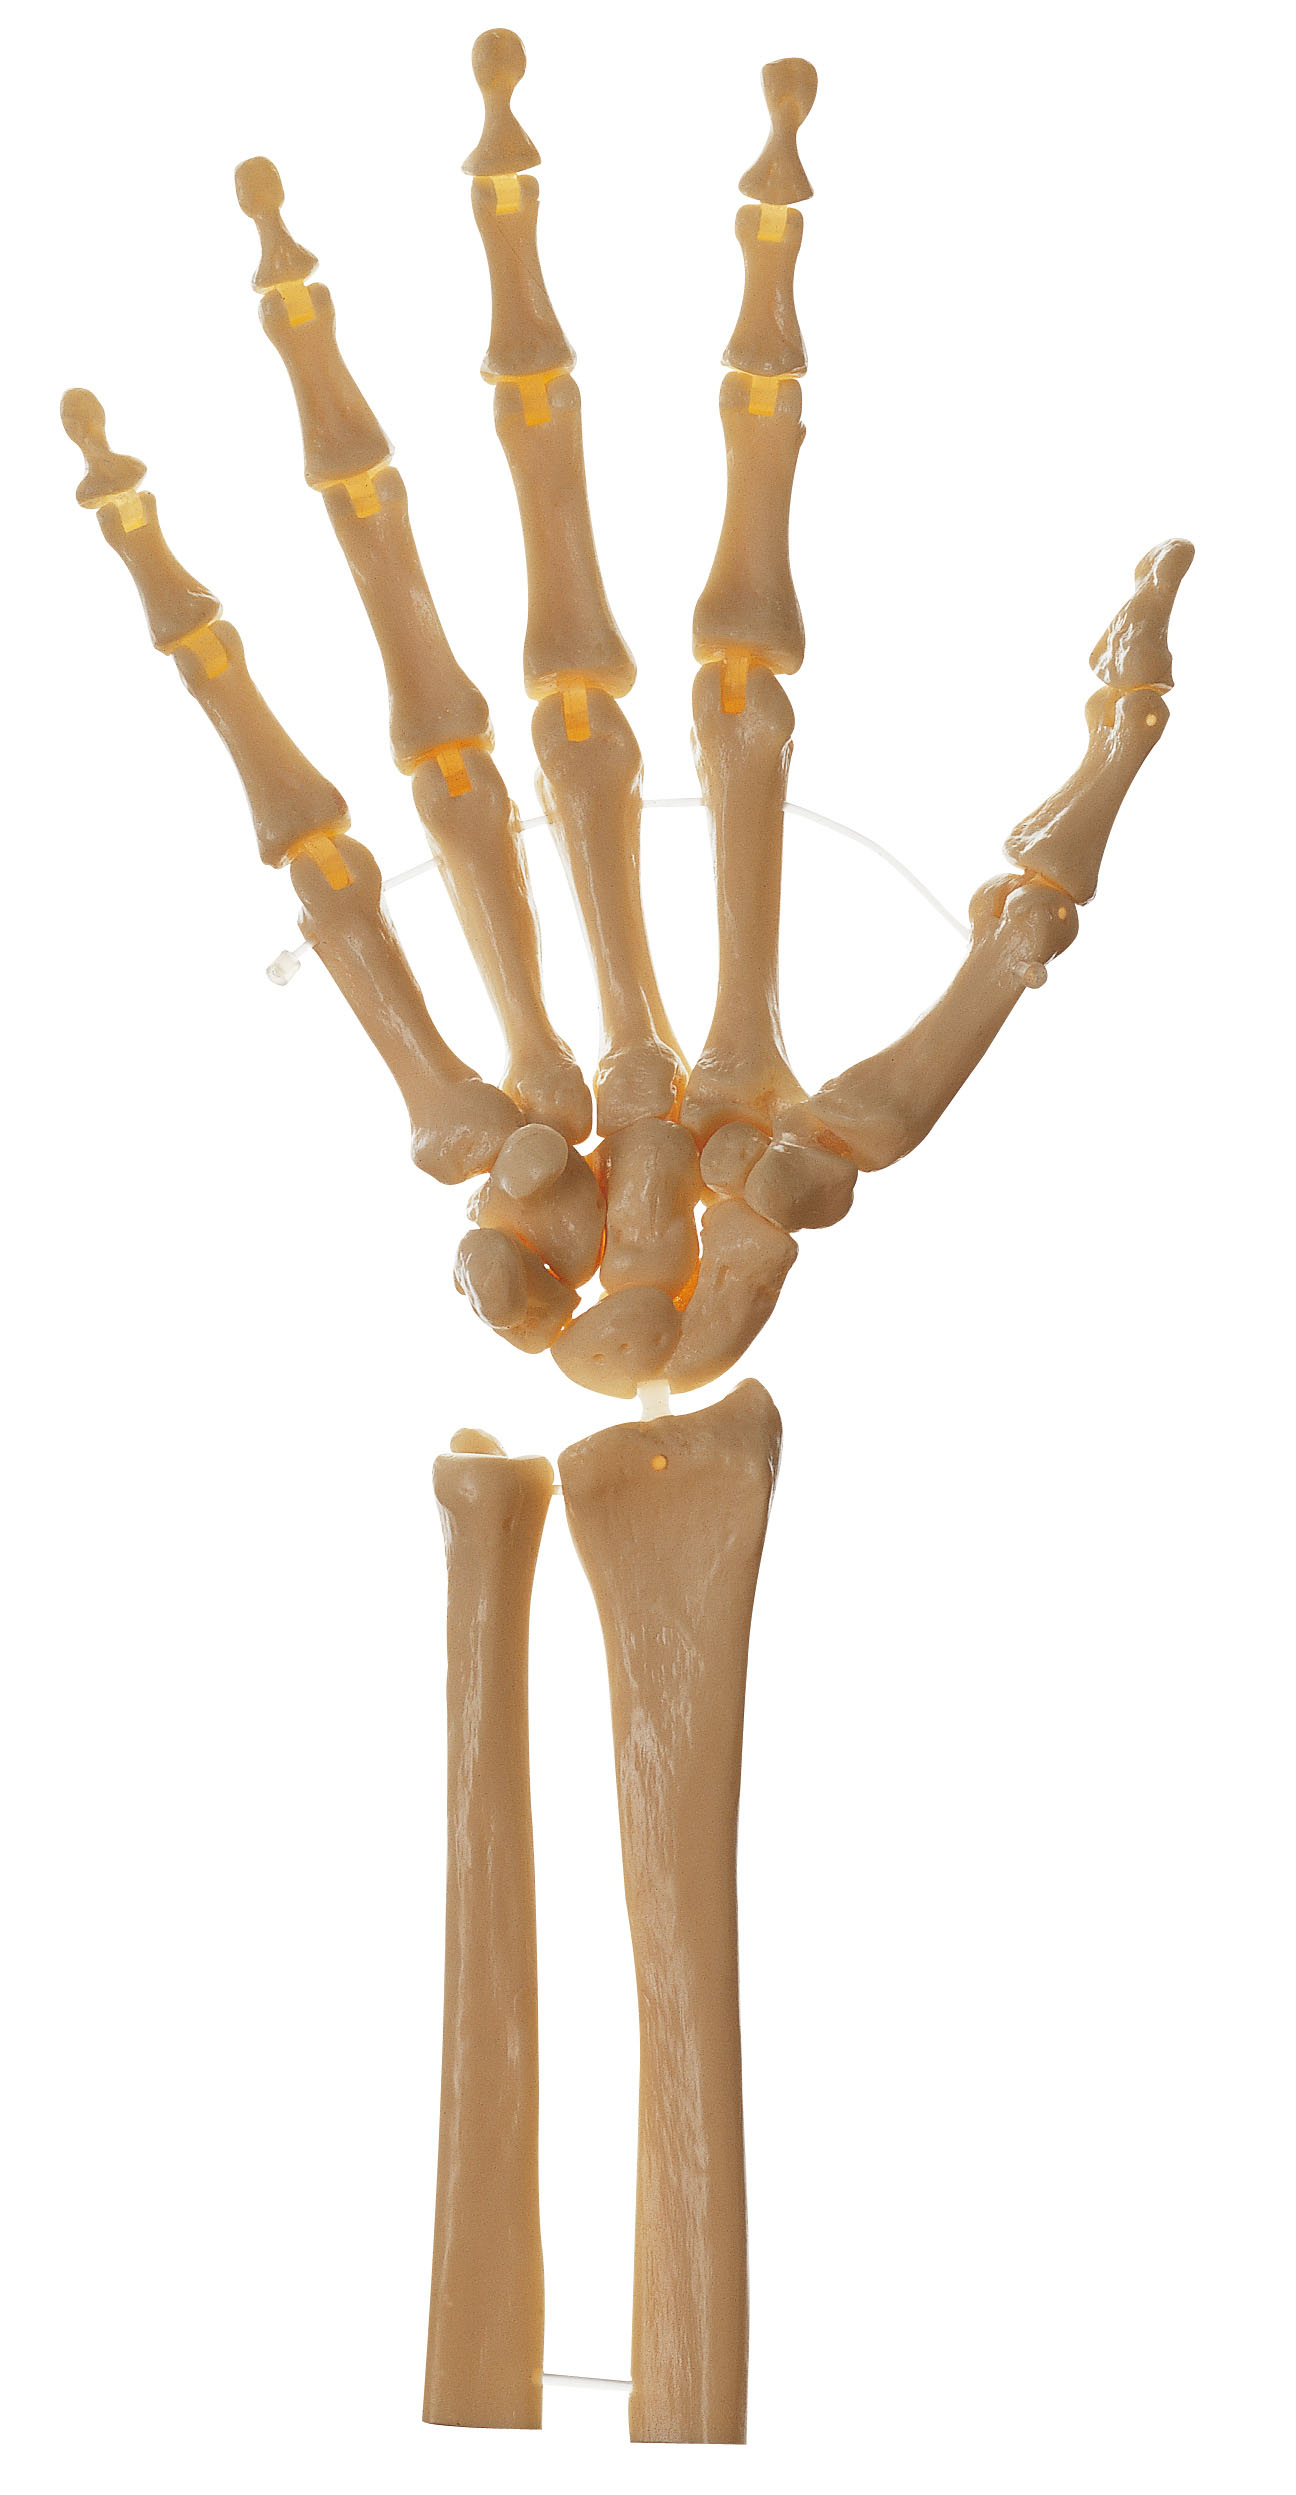 Skeleton of the Hand, Right (Rigid)